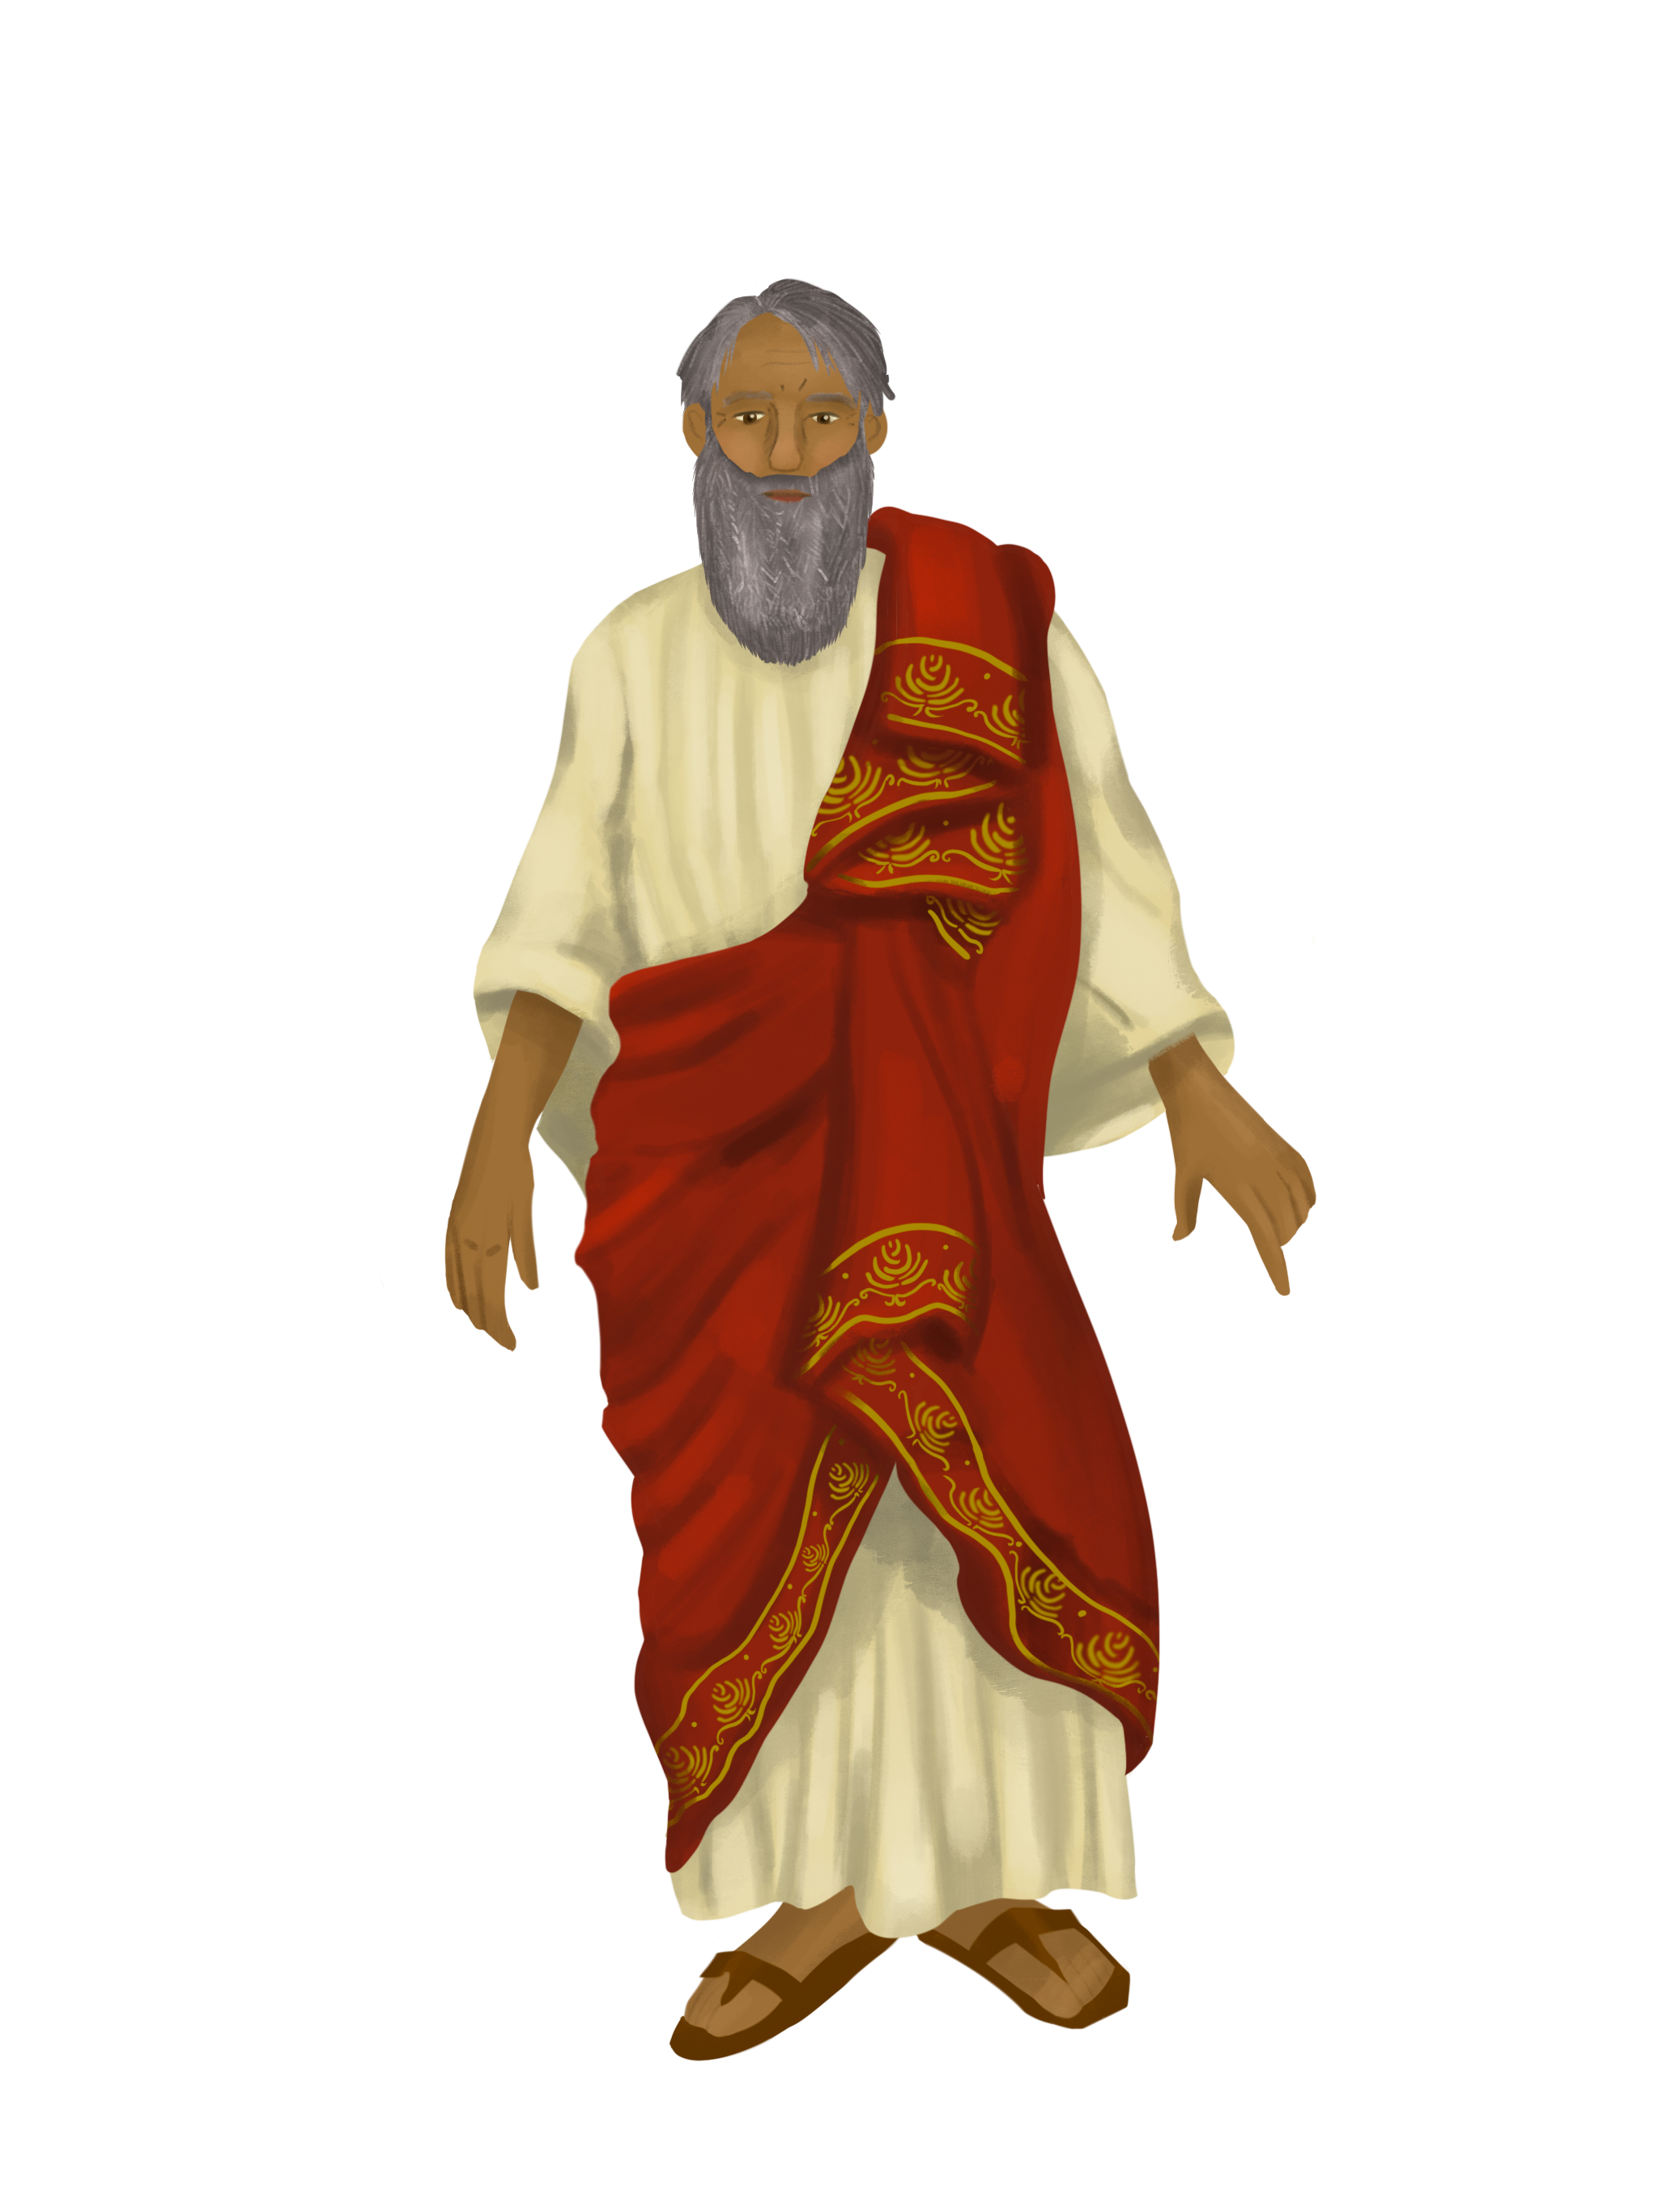 Old Man, resident of the town. He wears a long cream robe wrapped with a red scarf detailed with gold. He has brown skin, and a grey beard.